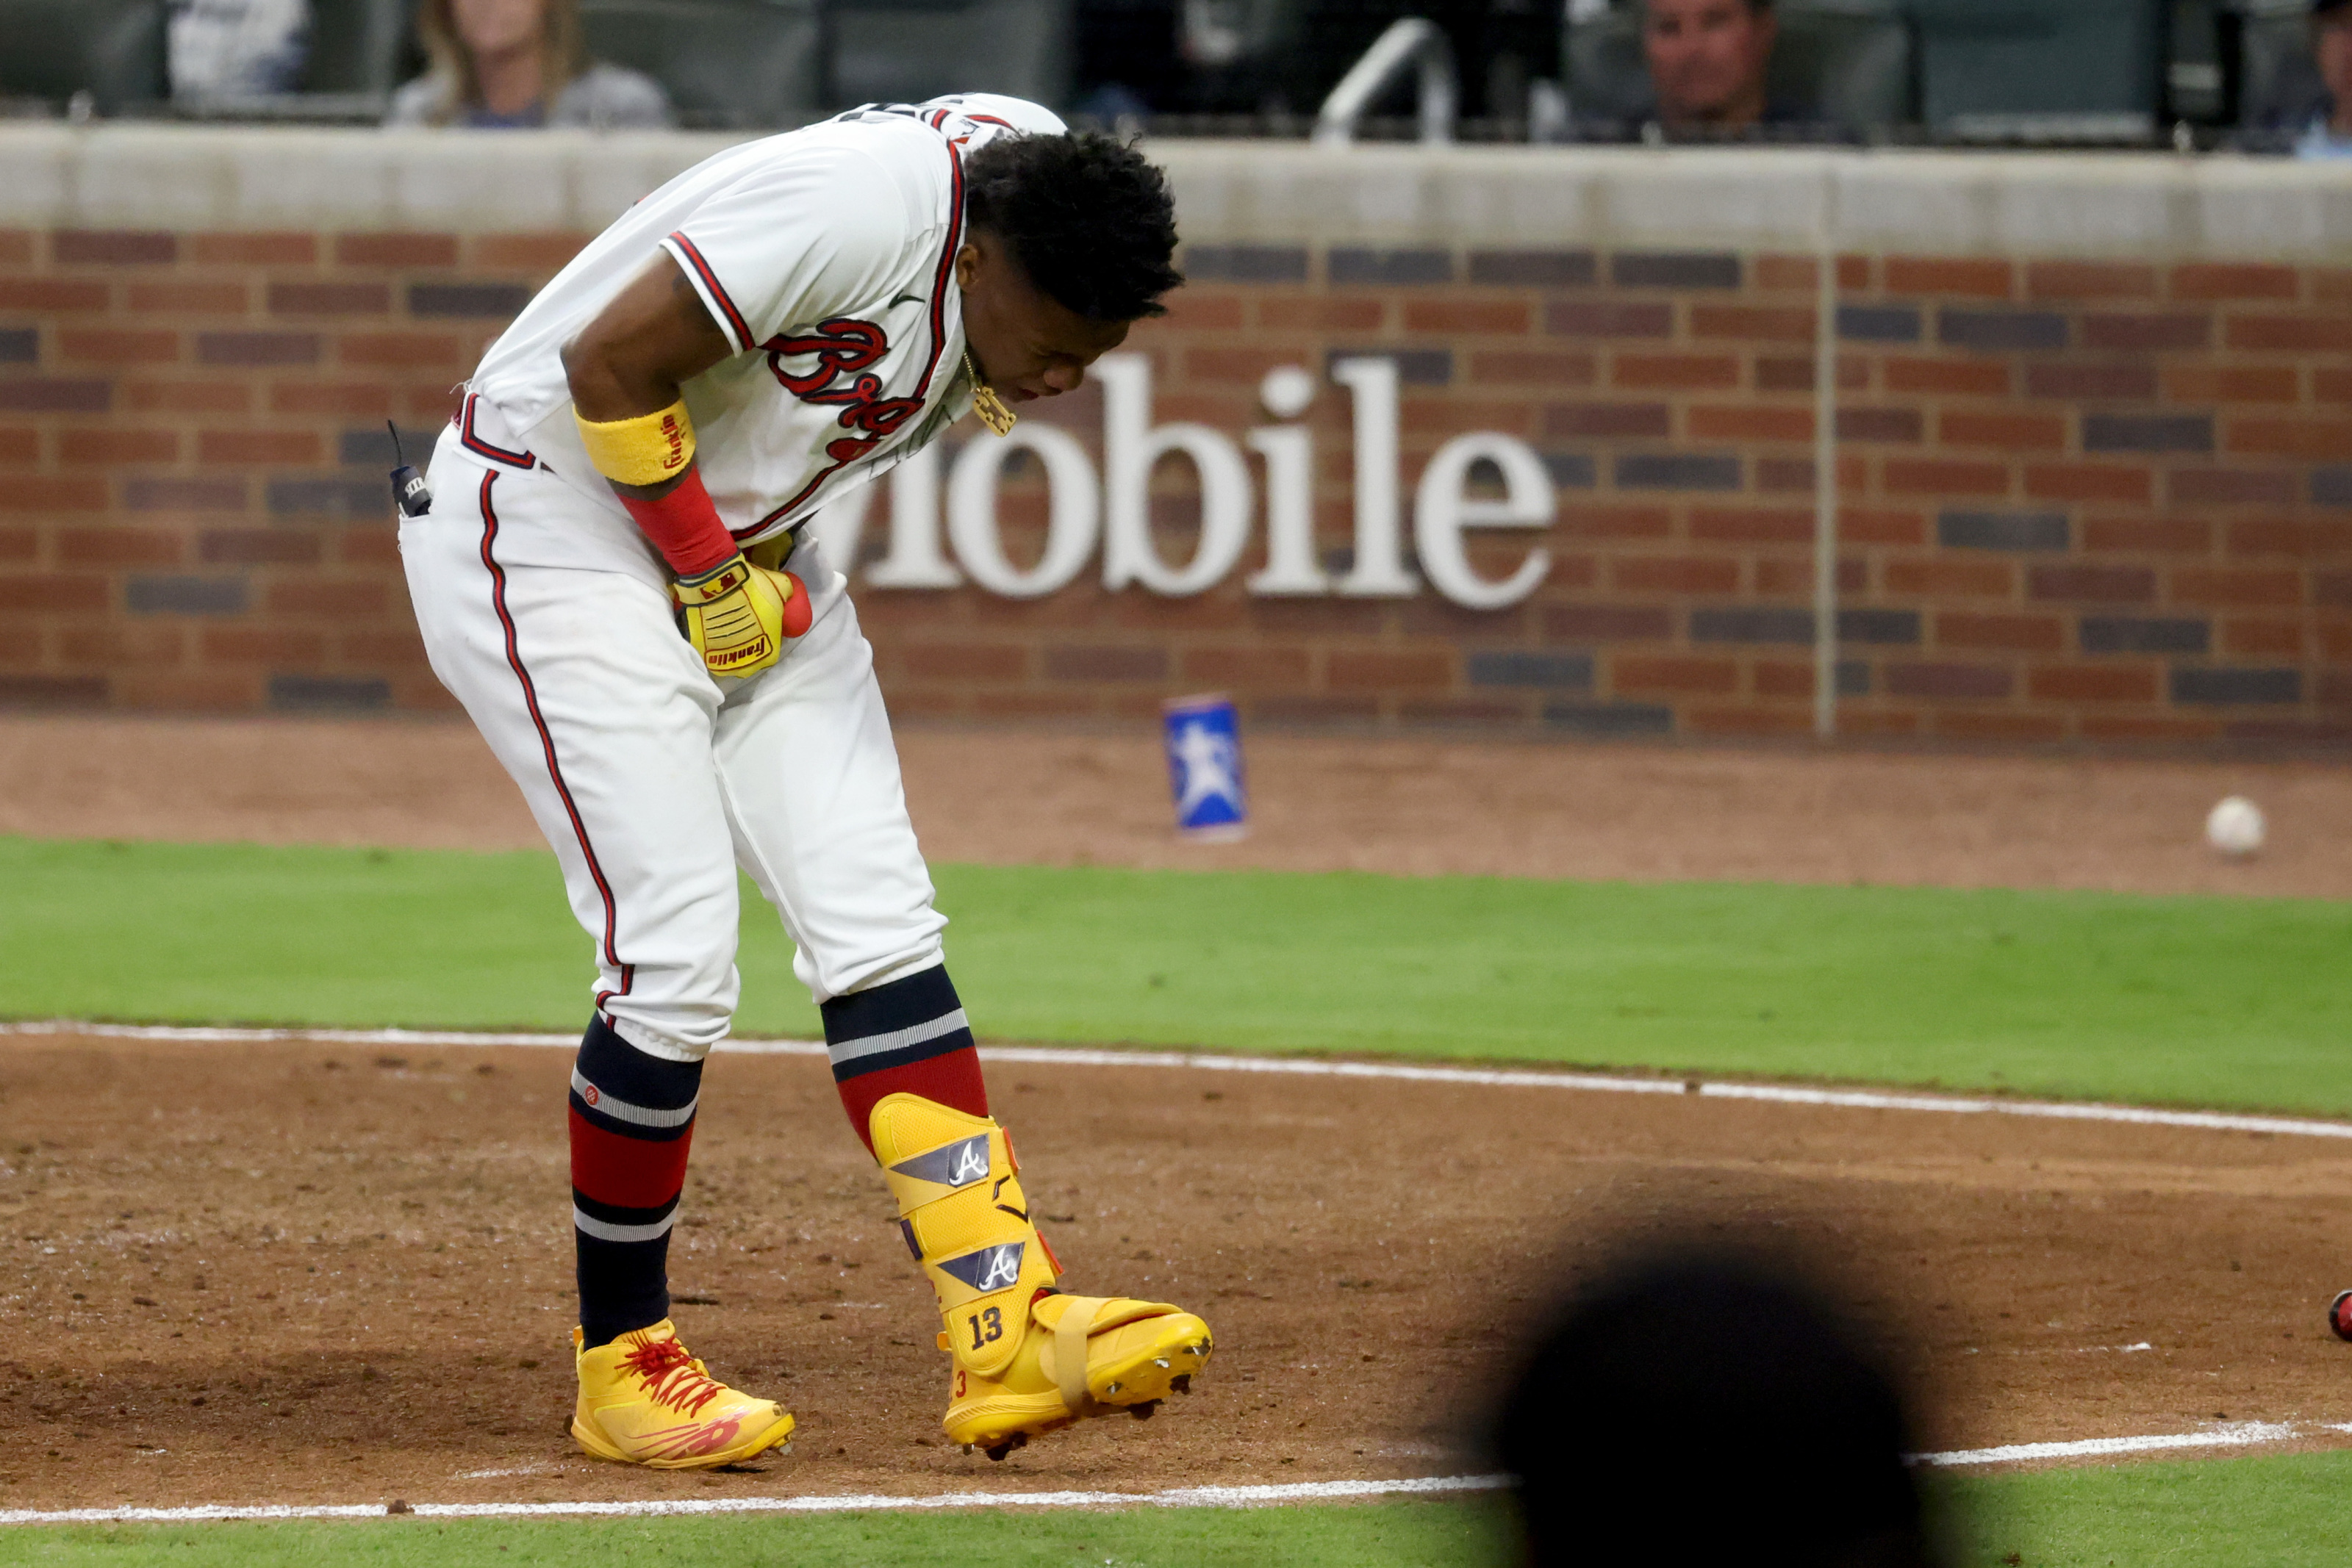 Watch Ronald Acuña step towards the mound after another Marlins